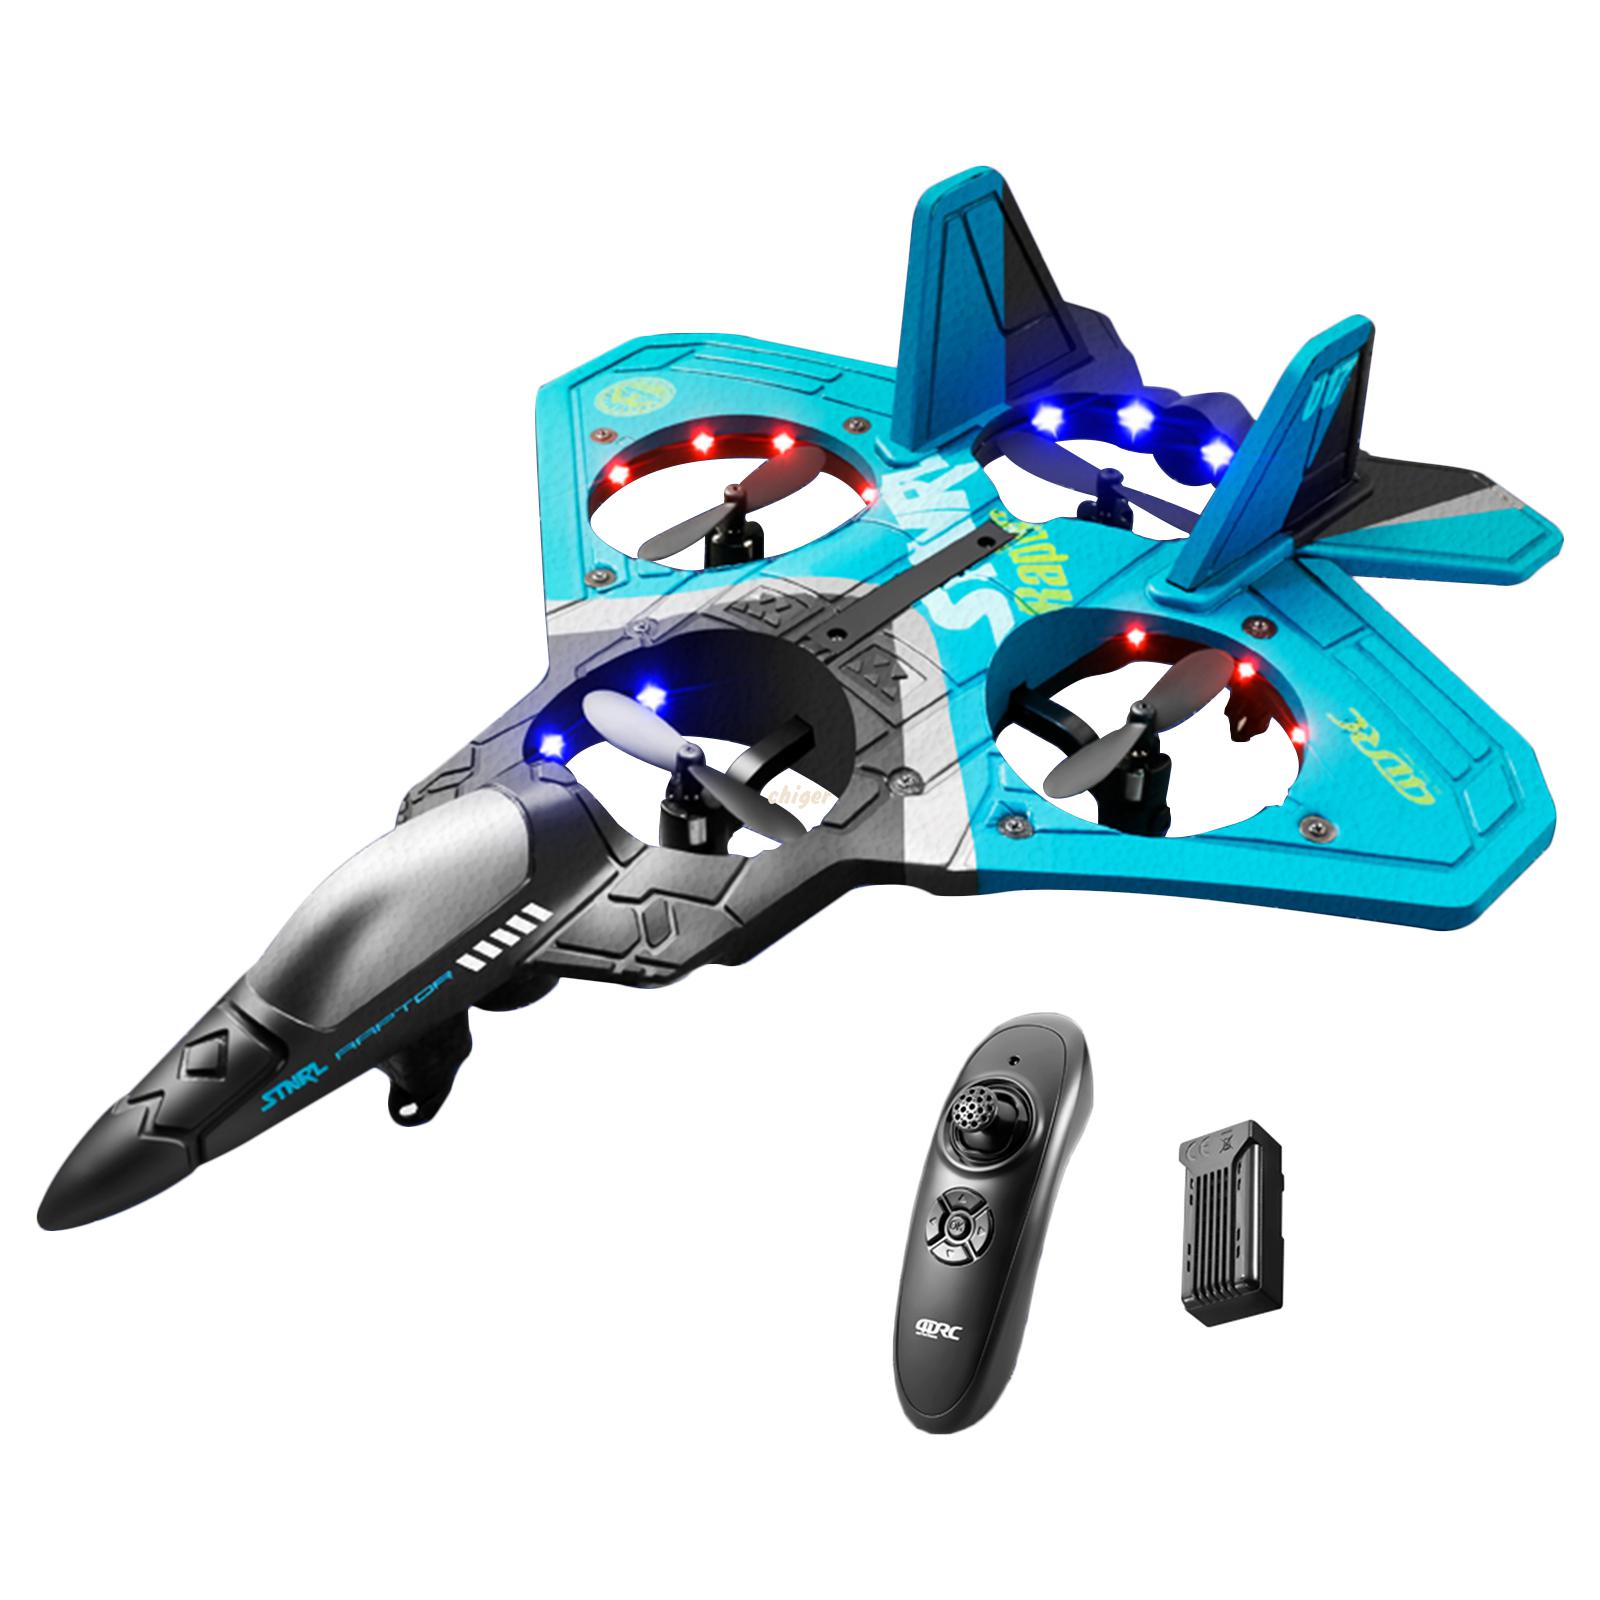 RC Remote Control Airplane 2.4G 6CH Remote Control V17 Fighter Hobby Plane Glider Airplane EPP Foam Toys RC drone Kids Gifts alx